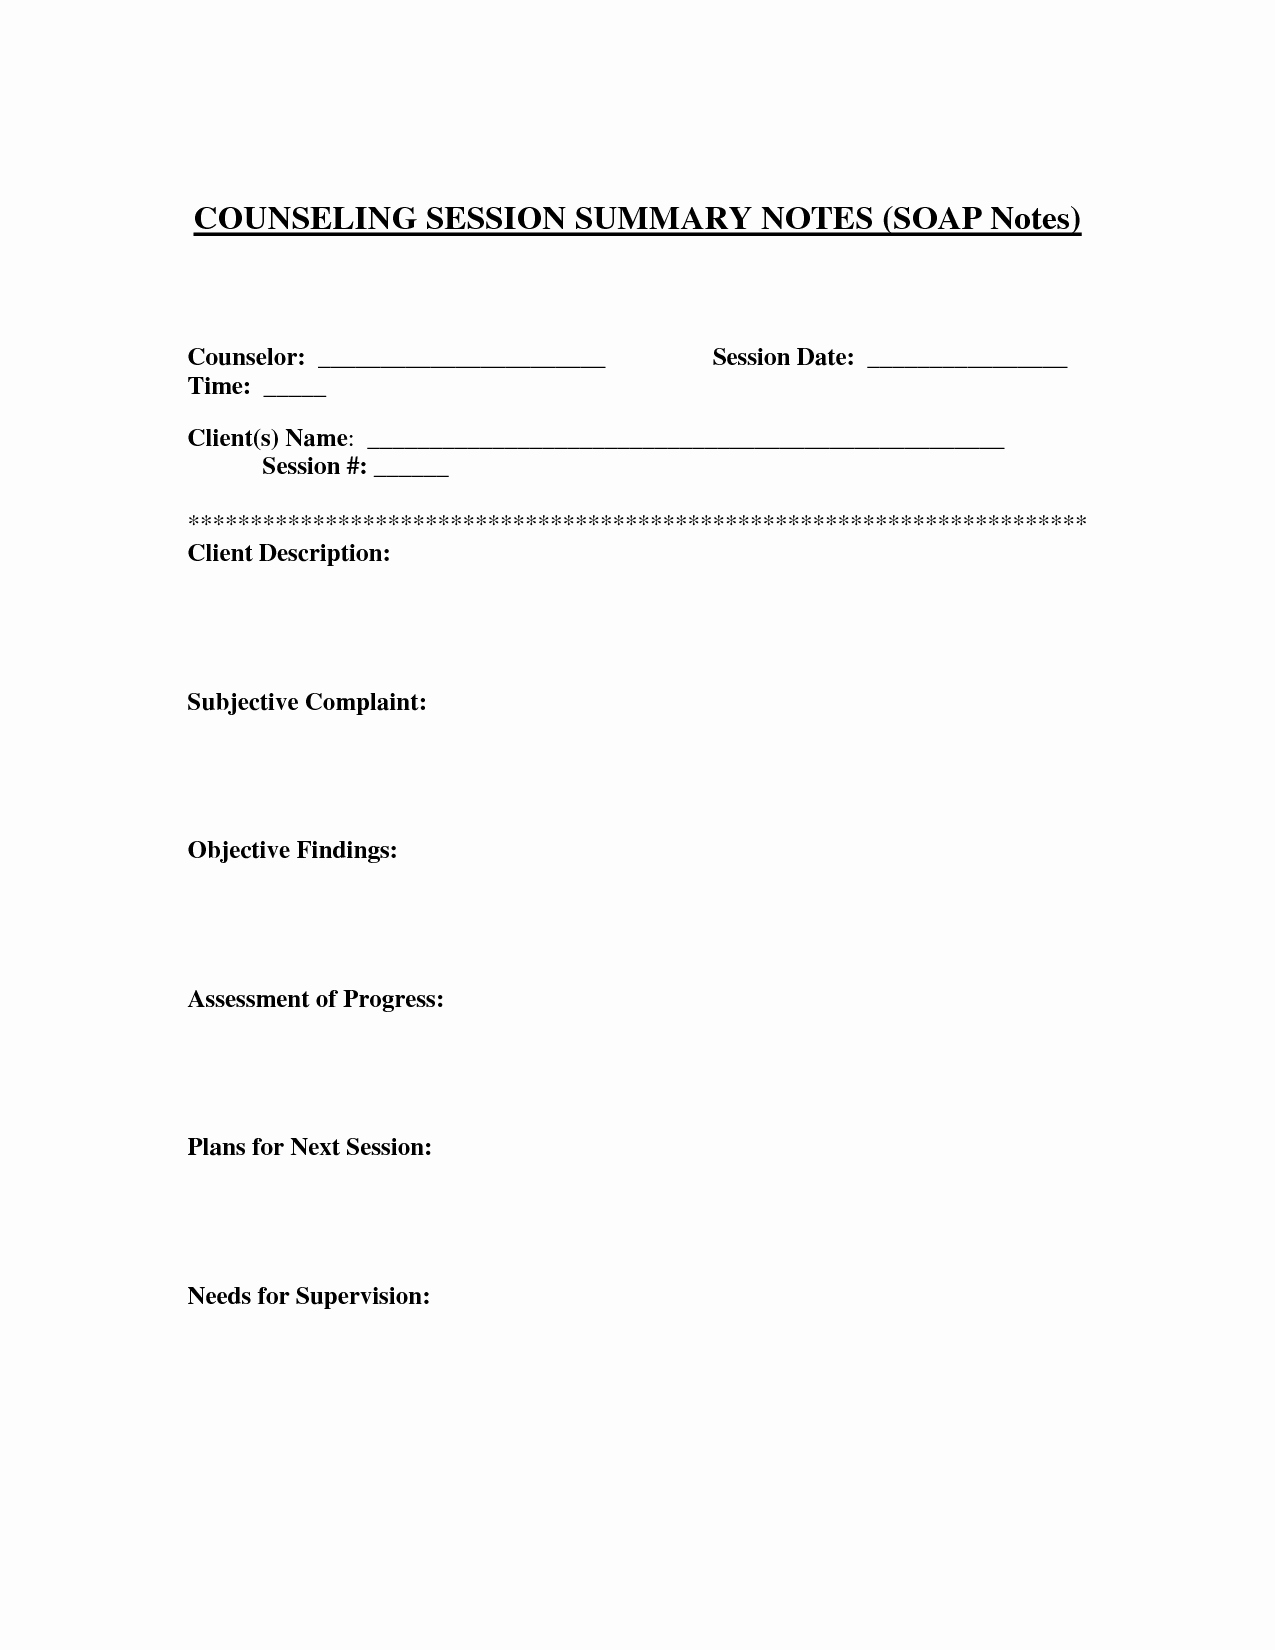 Blank soap Note Template Fresh soap Notes Template for Counseling Google Search